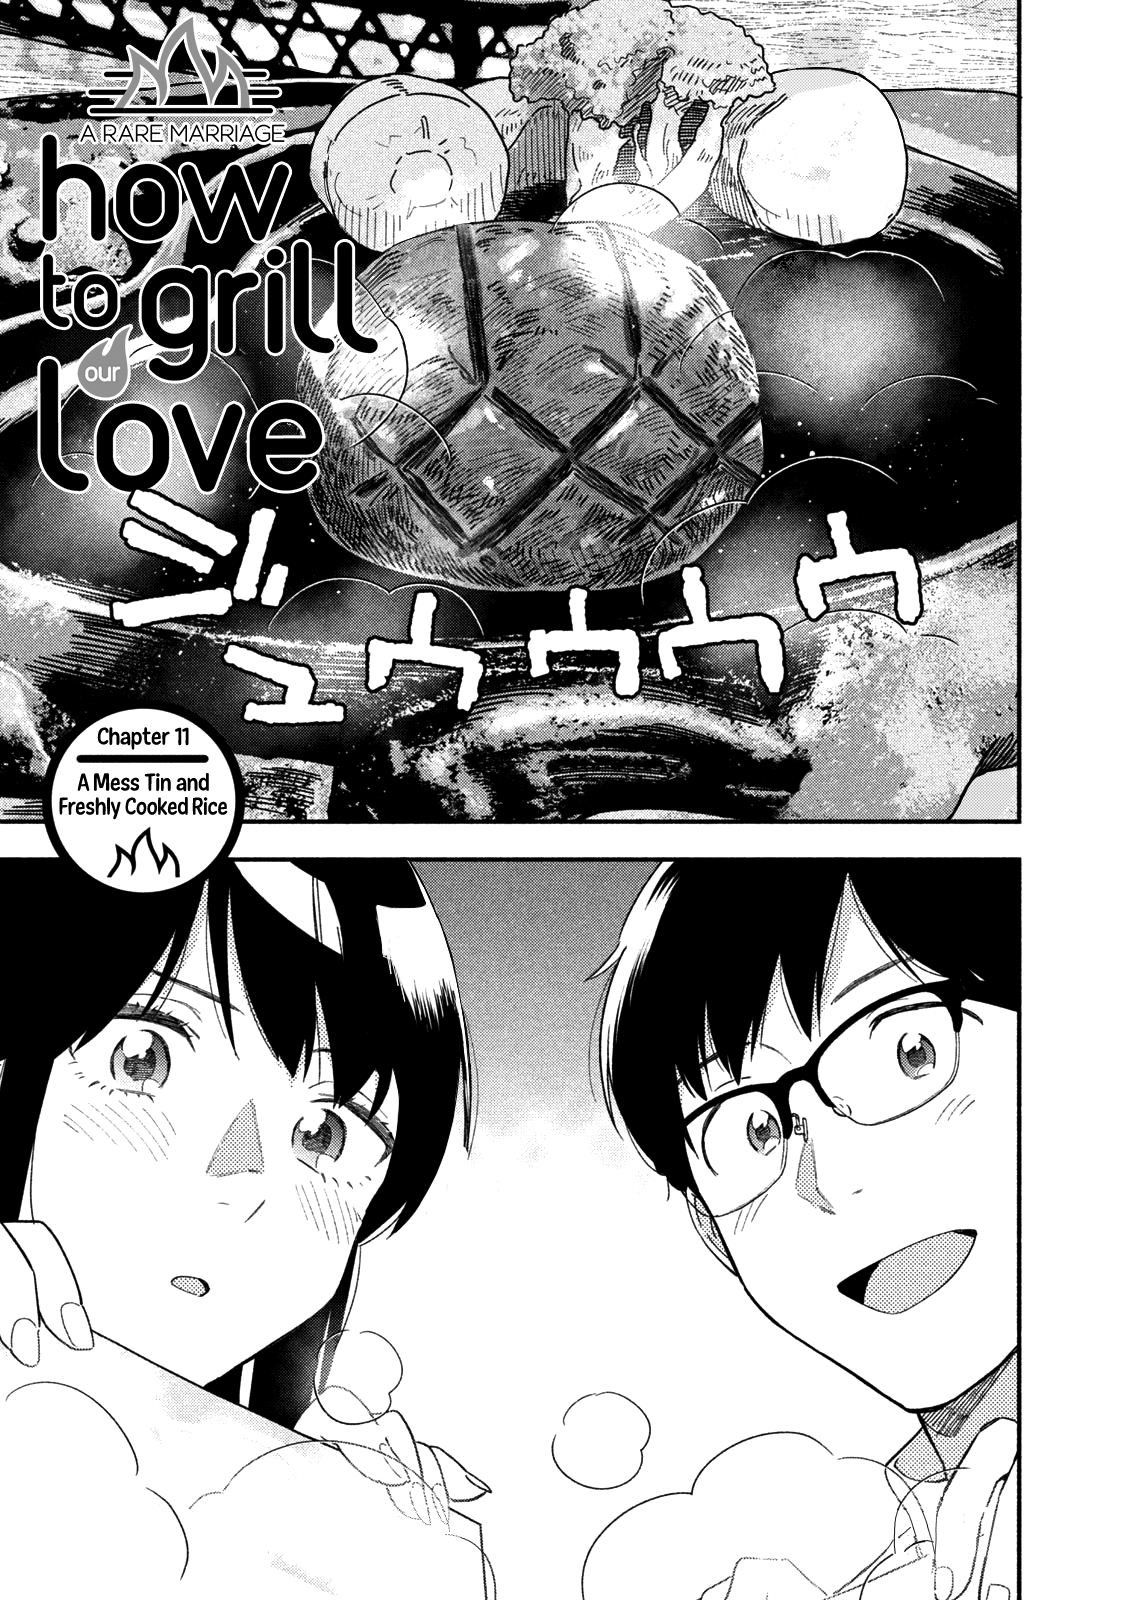 A Rare Marriage: How To Grill Our Love Chapter 11 #2